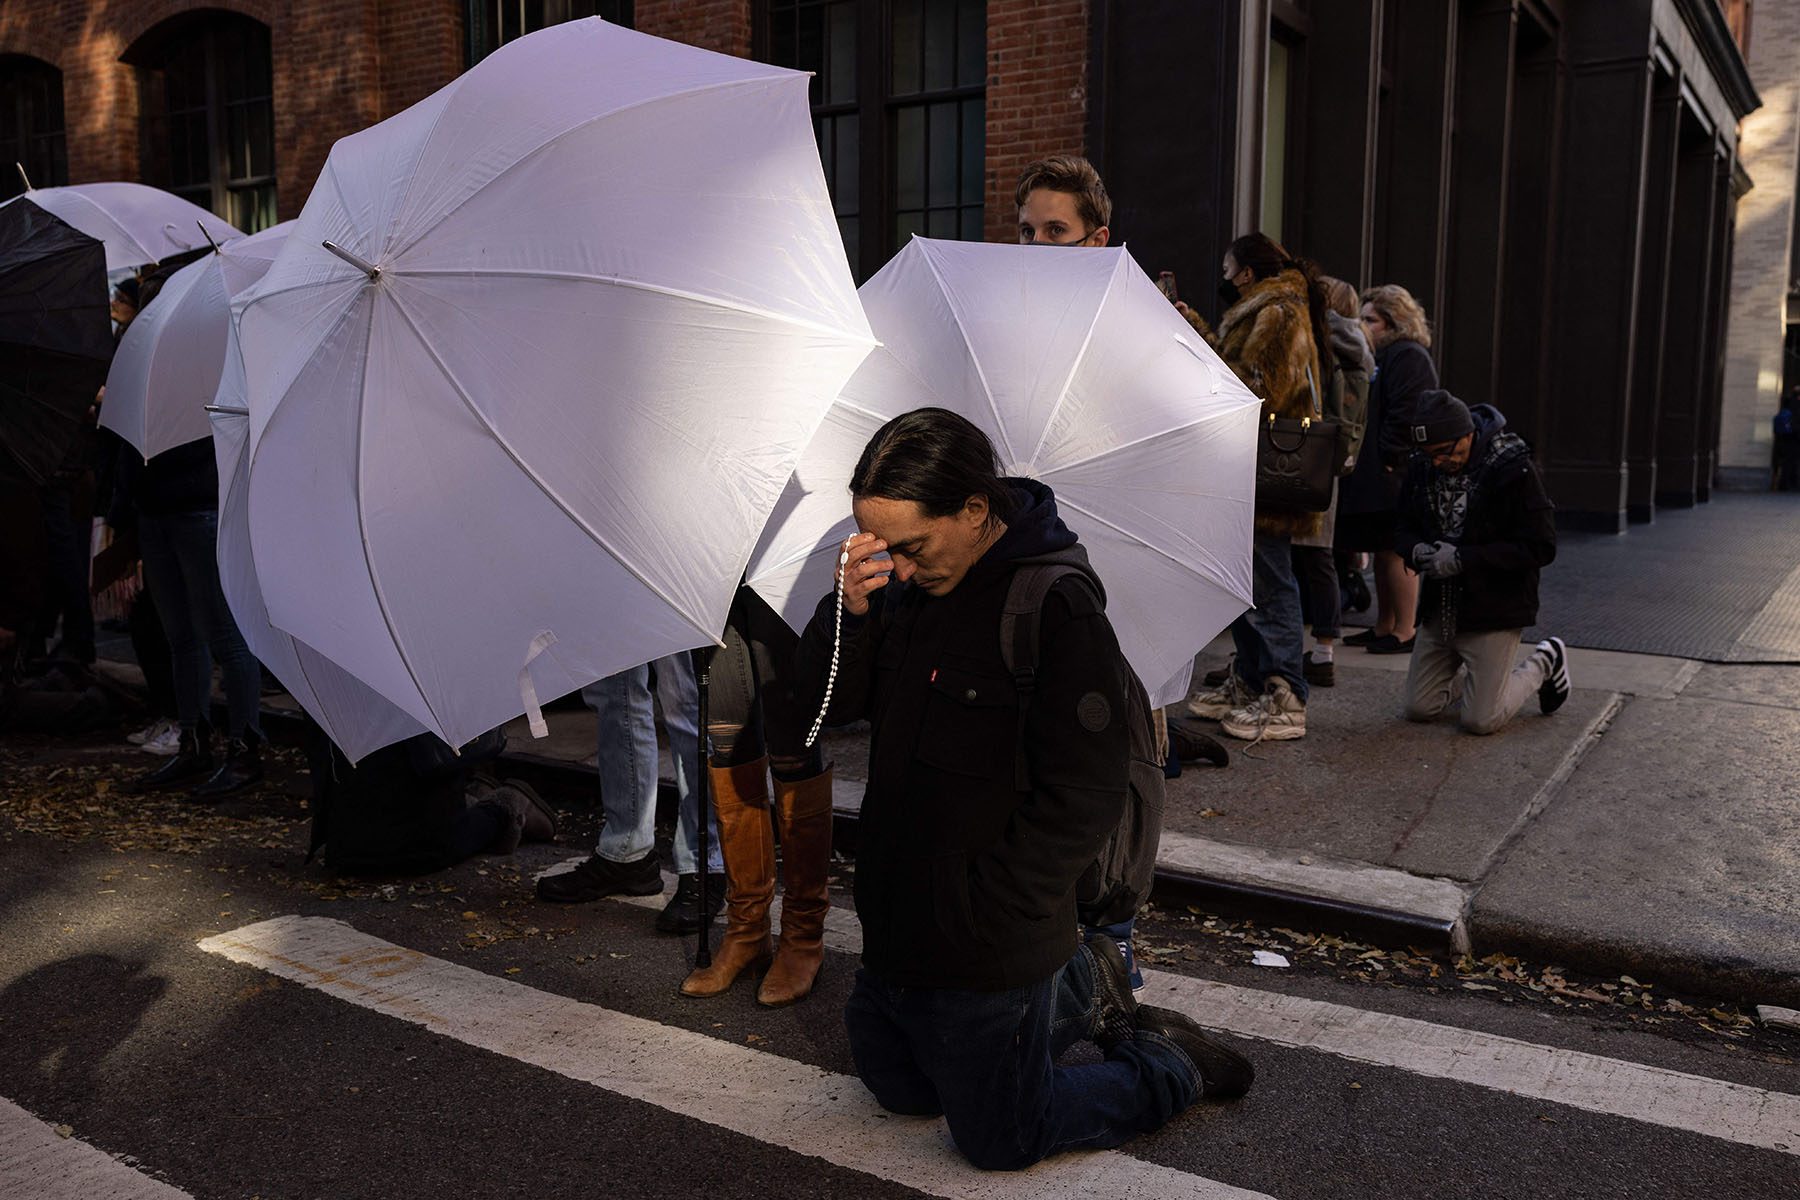 An anti-abortion activist kneels on the street in prayer in front of Planned Parenthood - Manhattan Health Center while abortion rights activists block the clinic using white umbrellas.